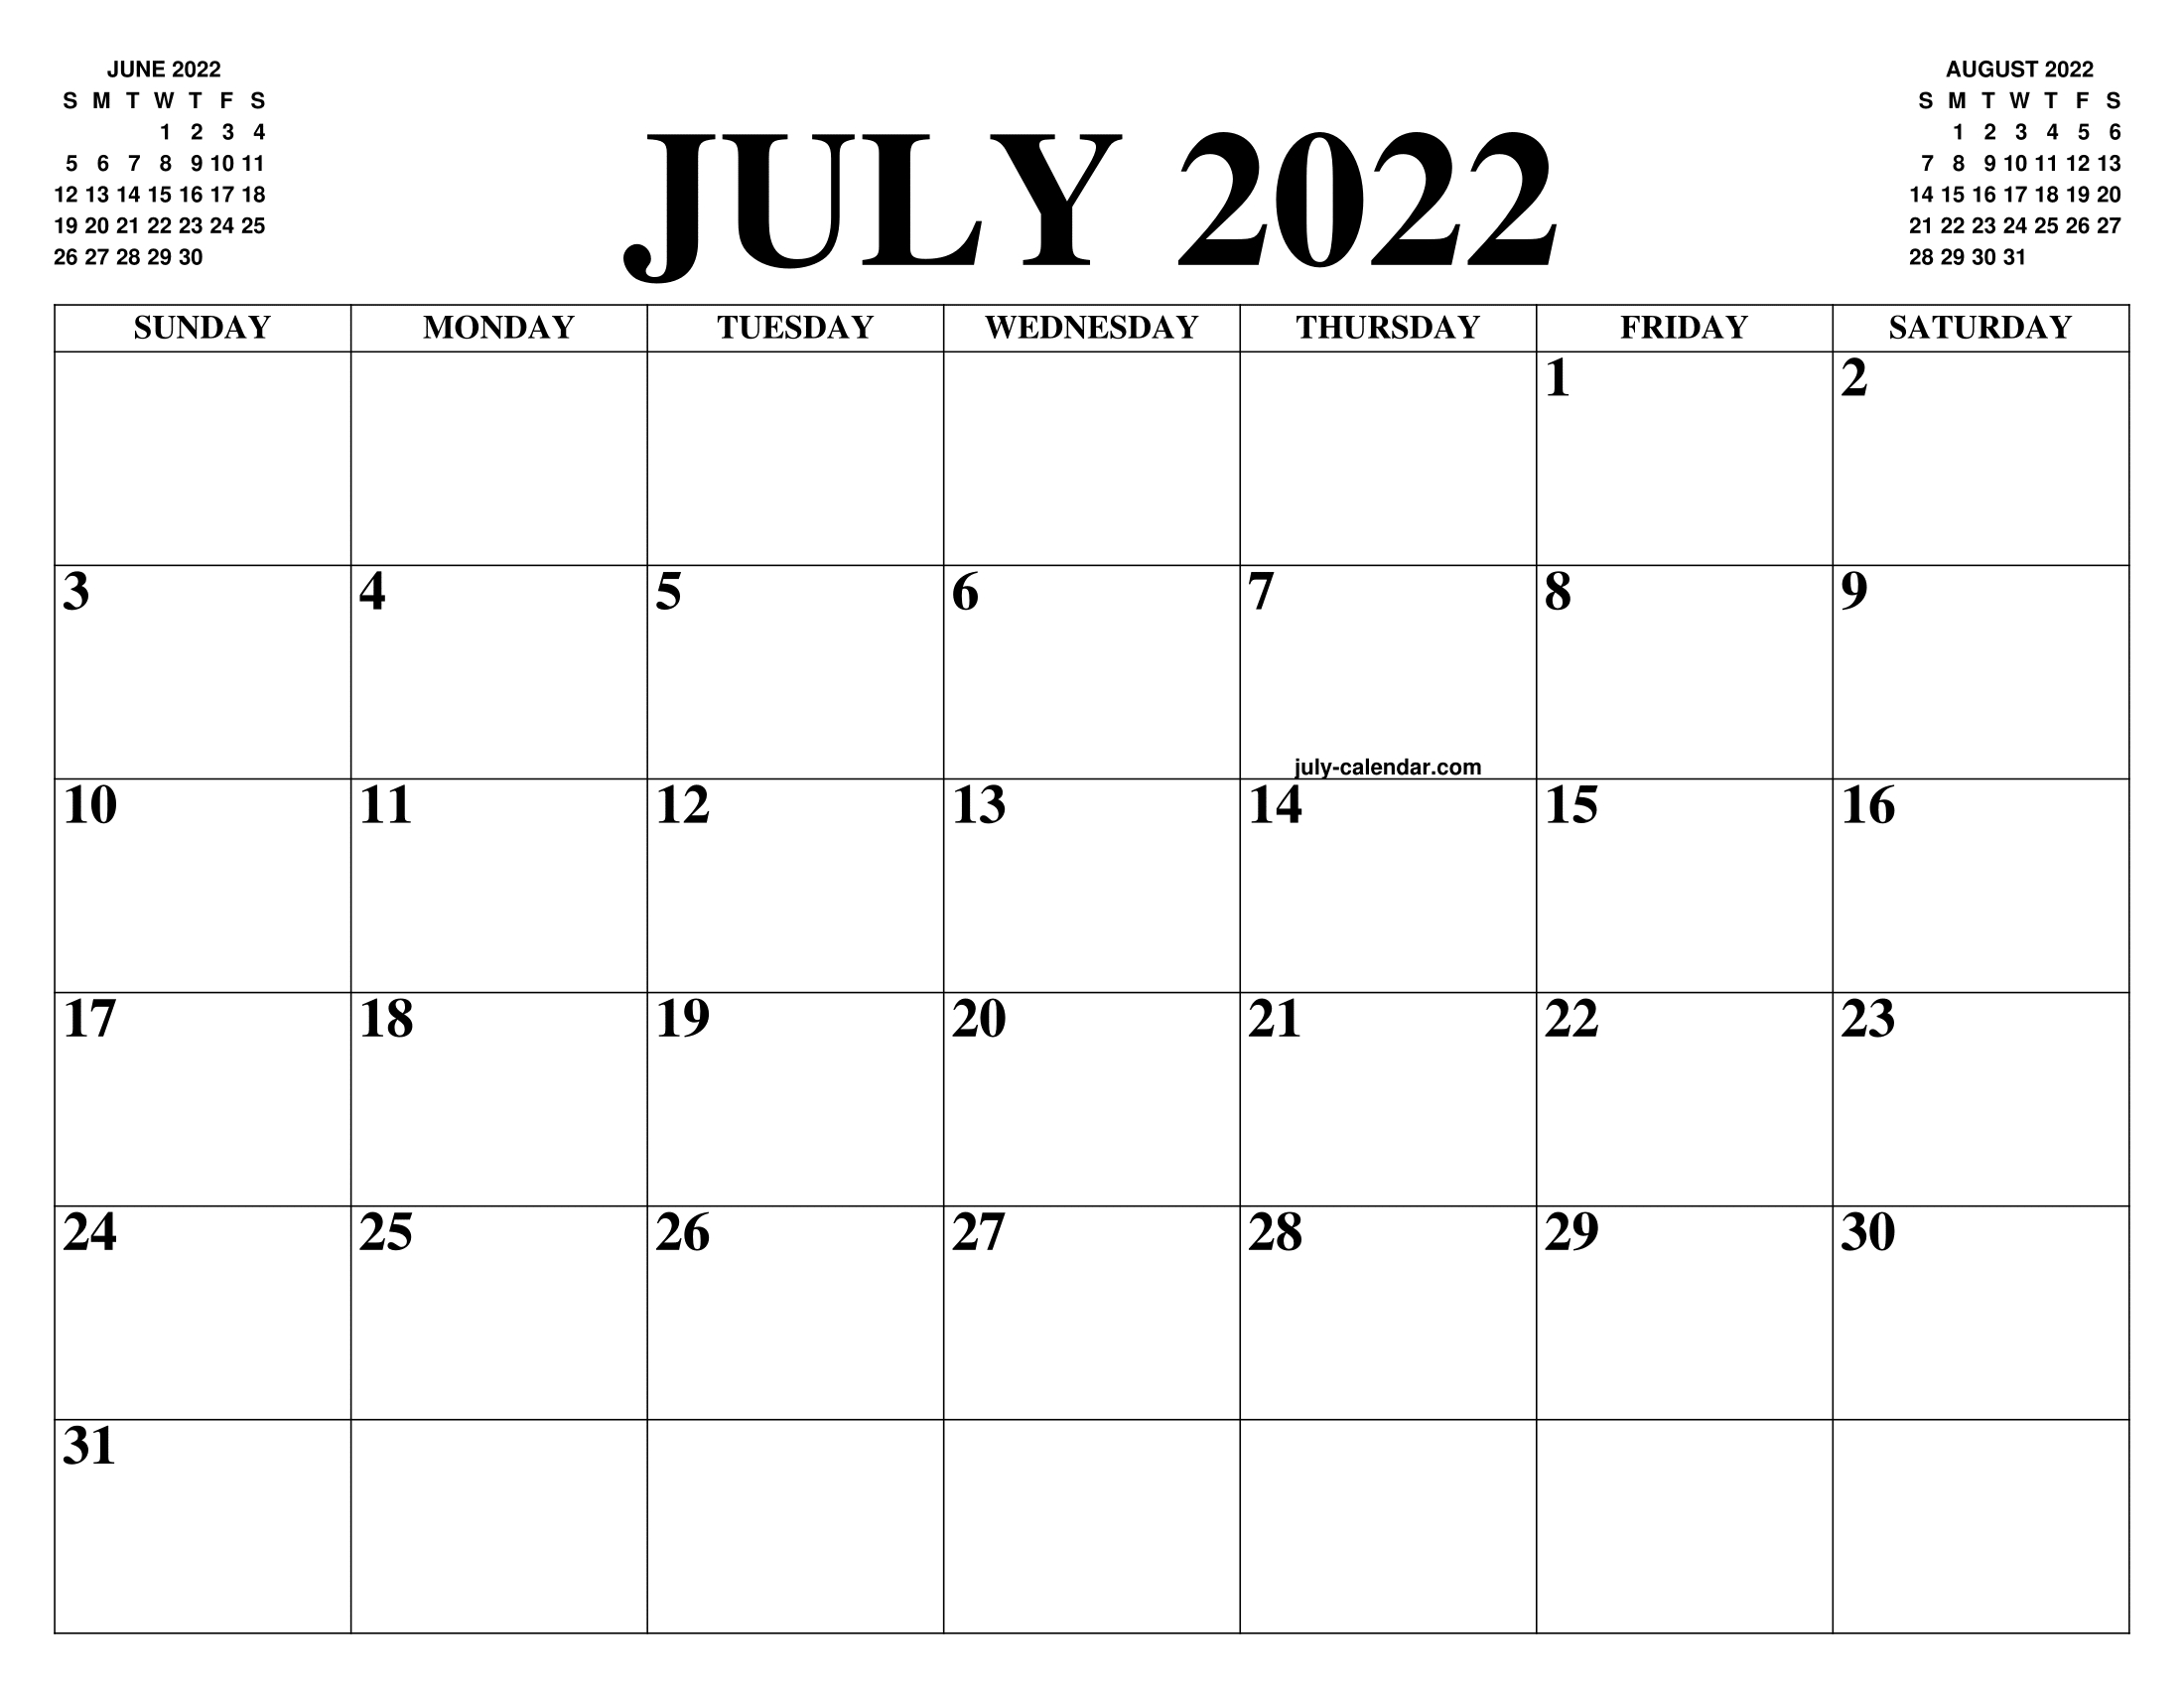 Catch How Many Months Until August 1 2022